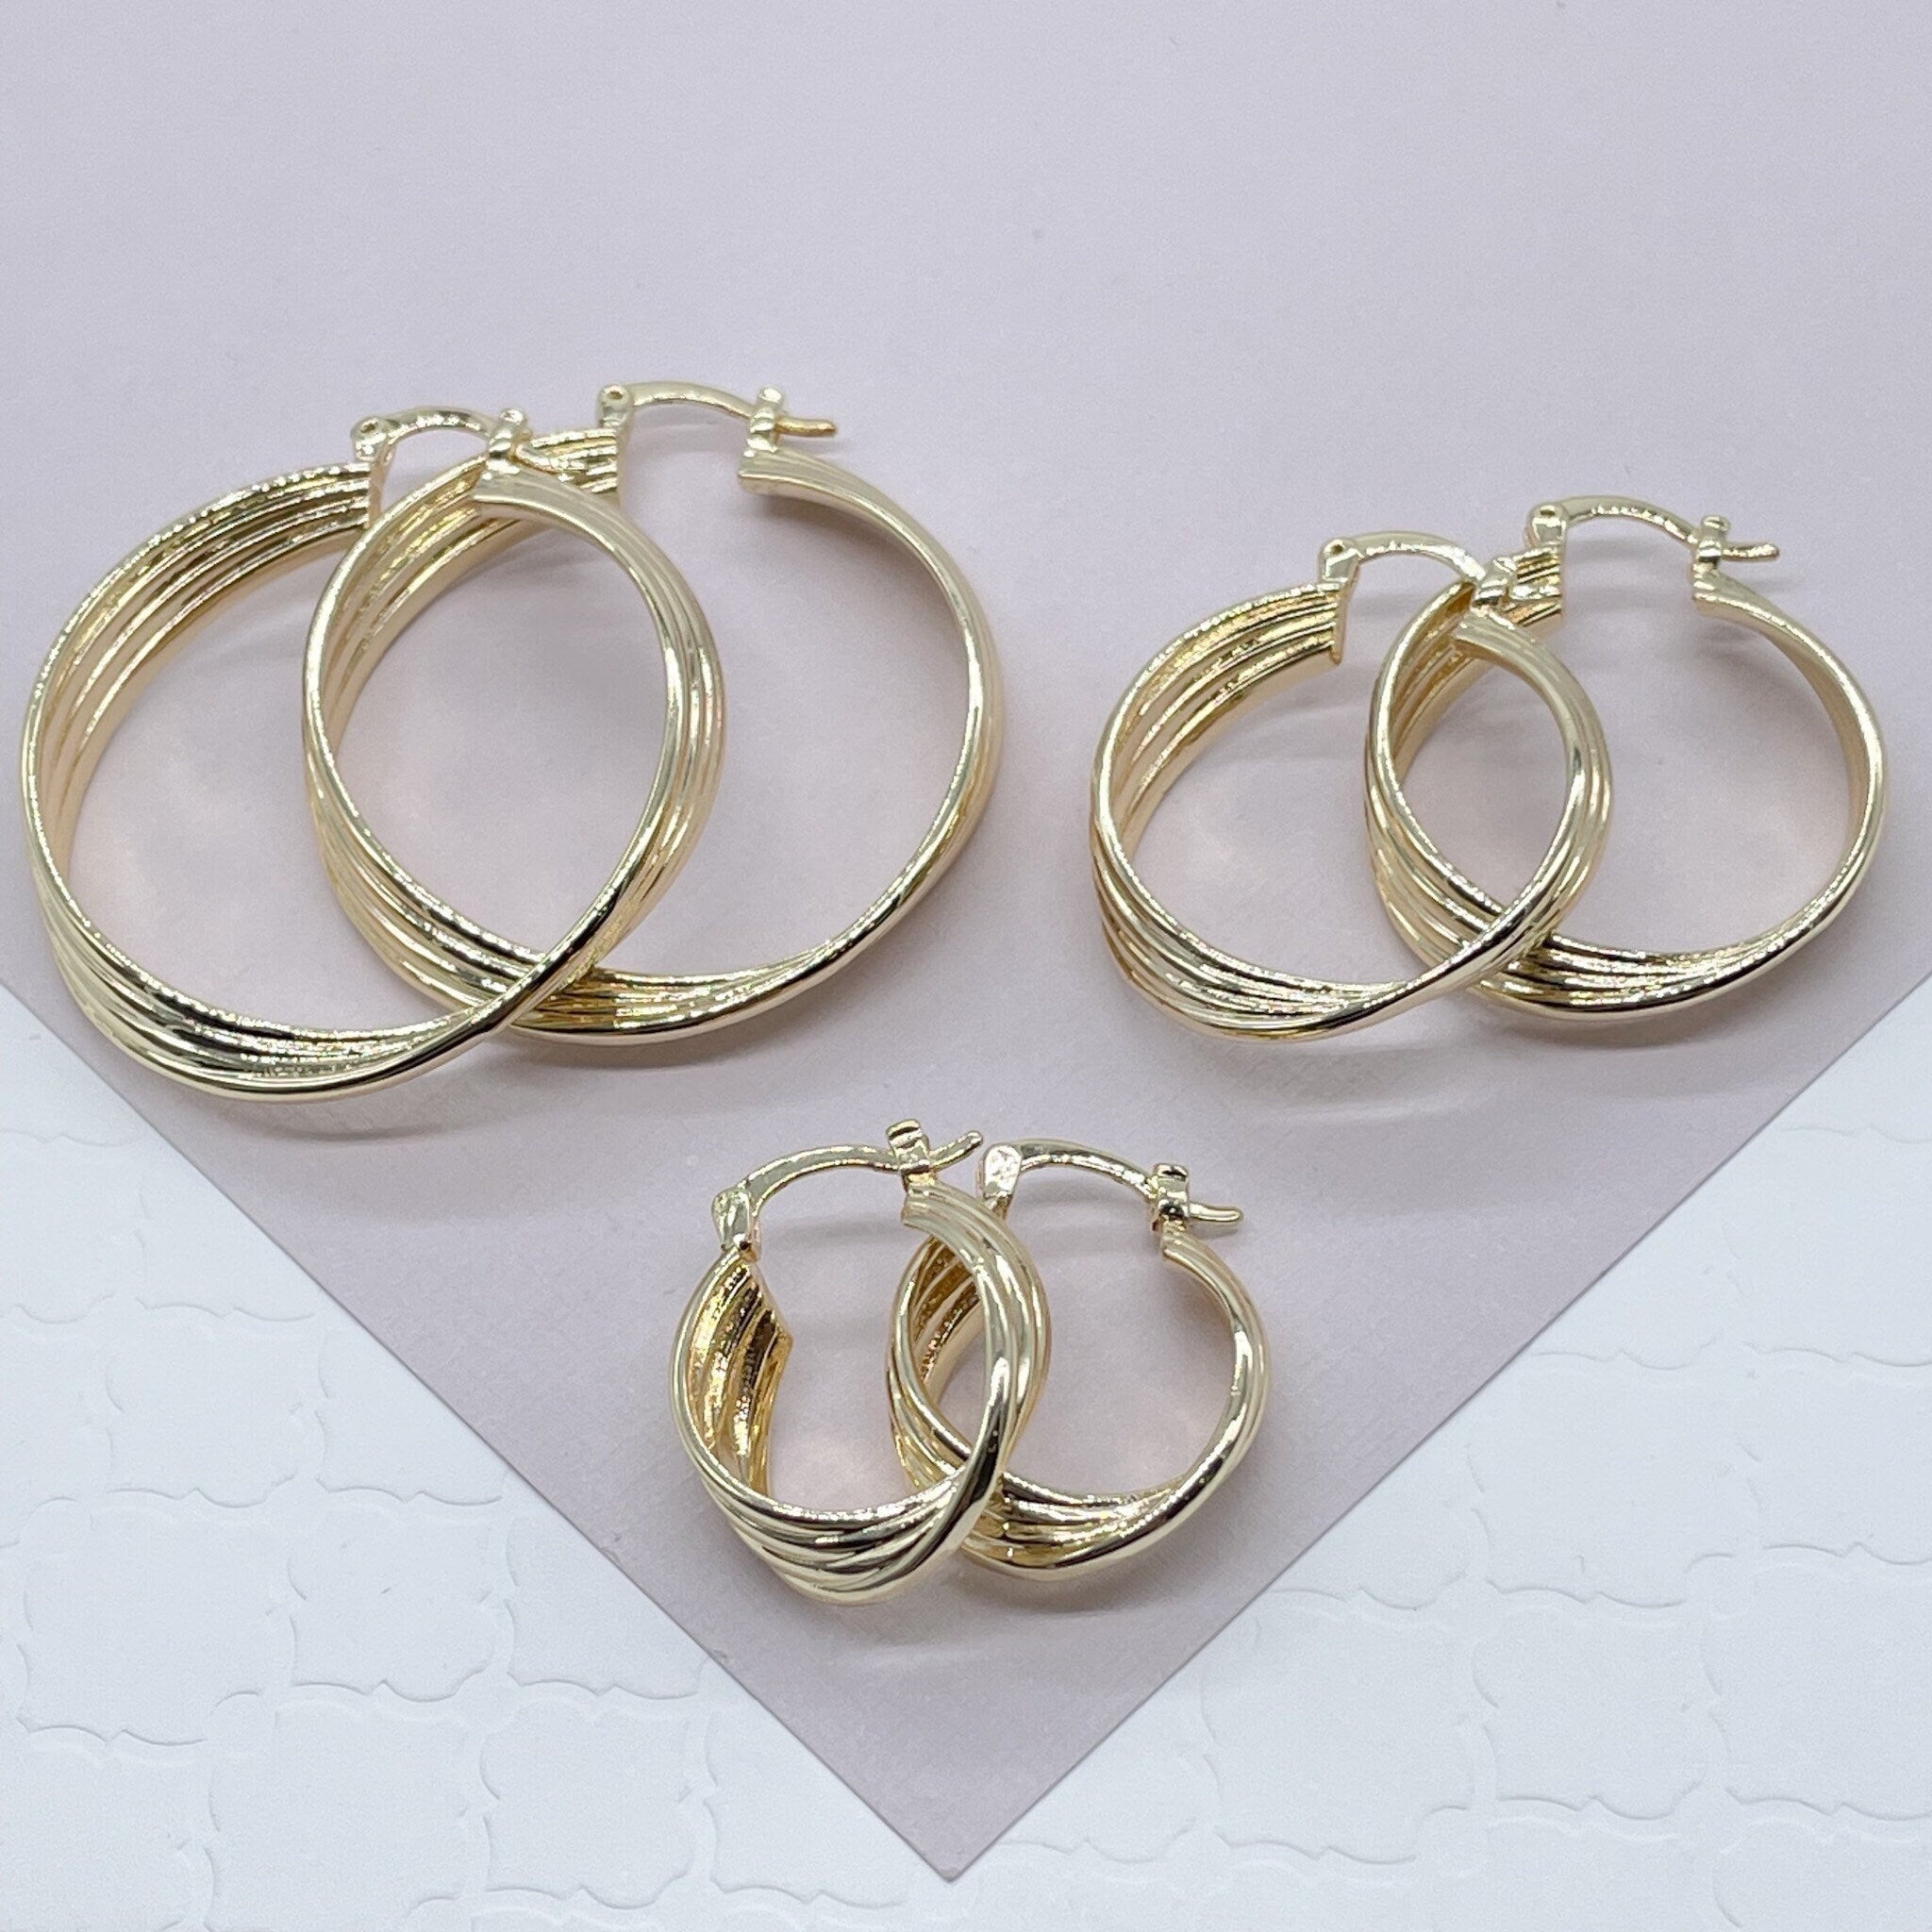 26.6mm 14K Yellow Gold 8mm Polished & Textured Hinged Hoop Earrings | eBay